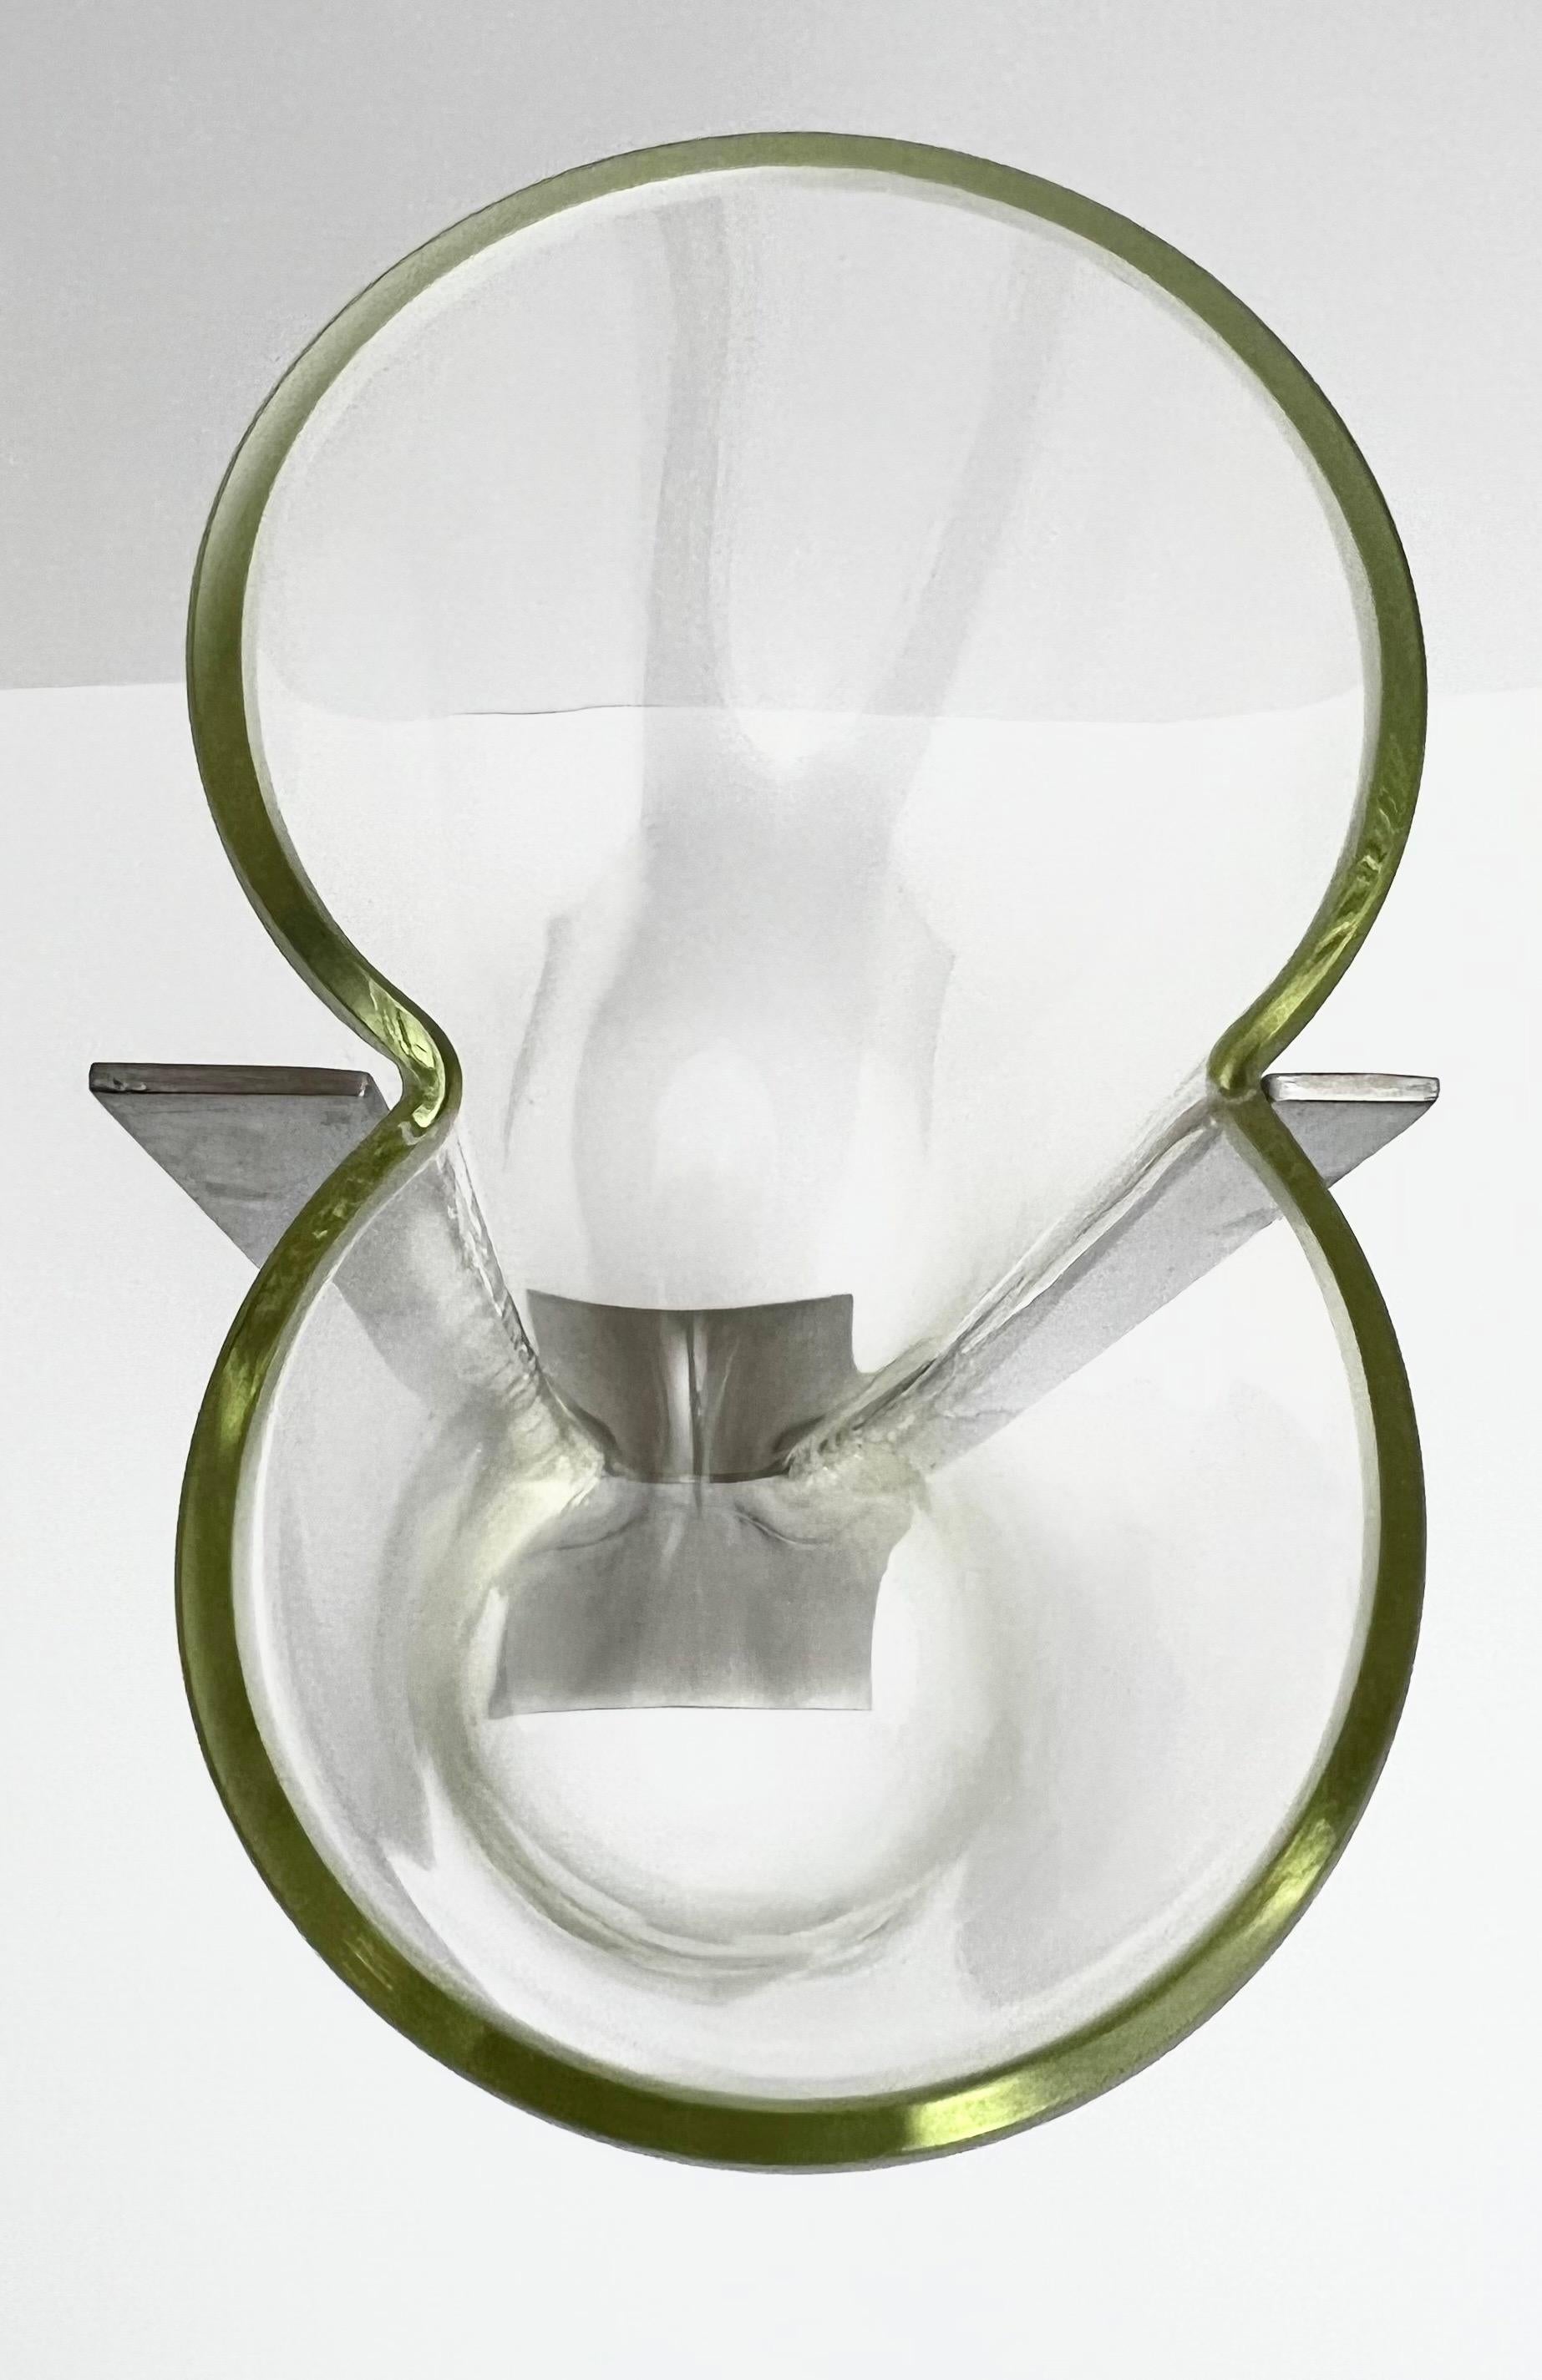 Sculpturally stunning is this Carlo Nason glass vase or sculpture set in steel, circa mid seventies. Beautiful round lines of the glass compliment the straighter edges of the stainless steel. An extraordinary juxtaposition of glass and steel. Superb